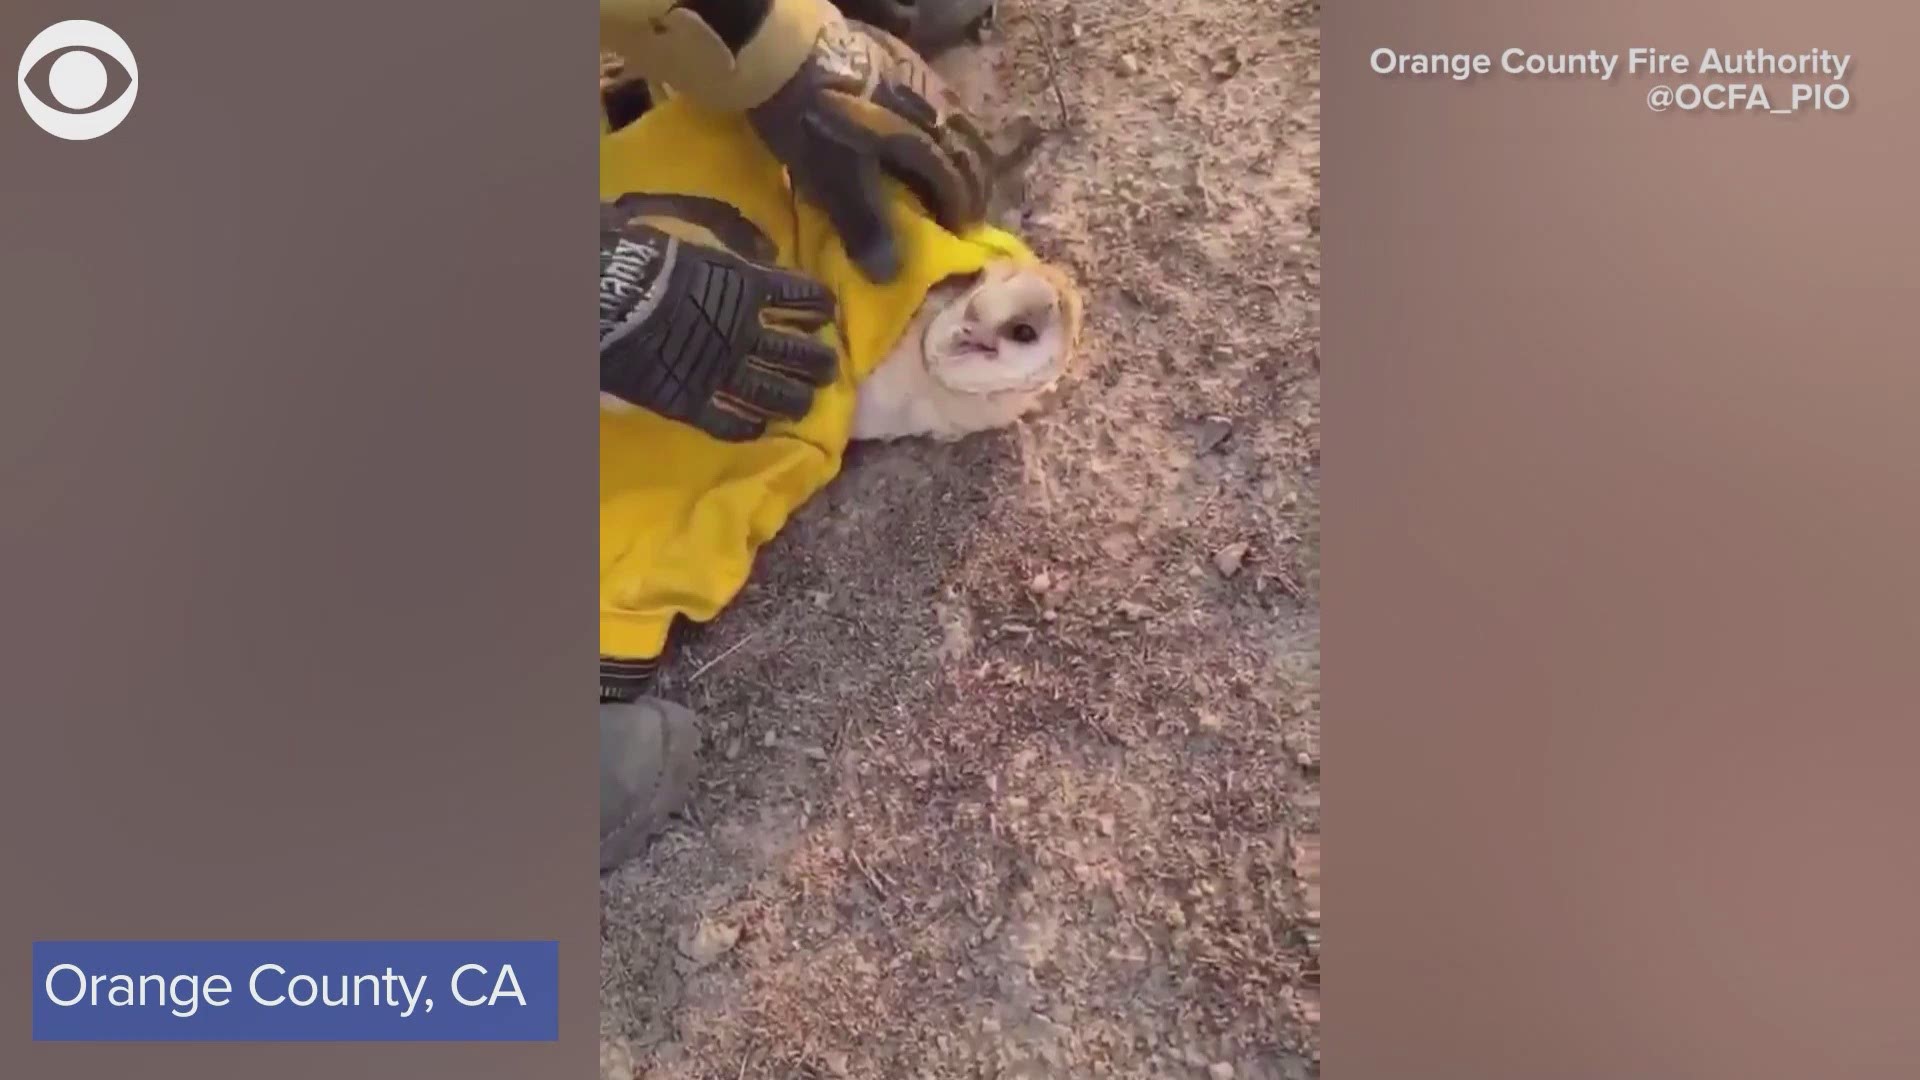 The Orange County Fire Authority rescued this owl from the Silverado Fire in California last Tuesday.